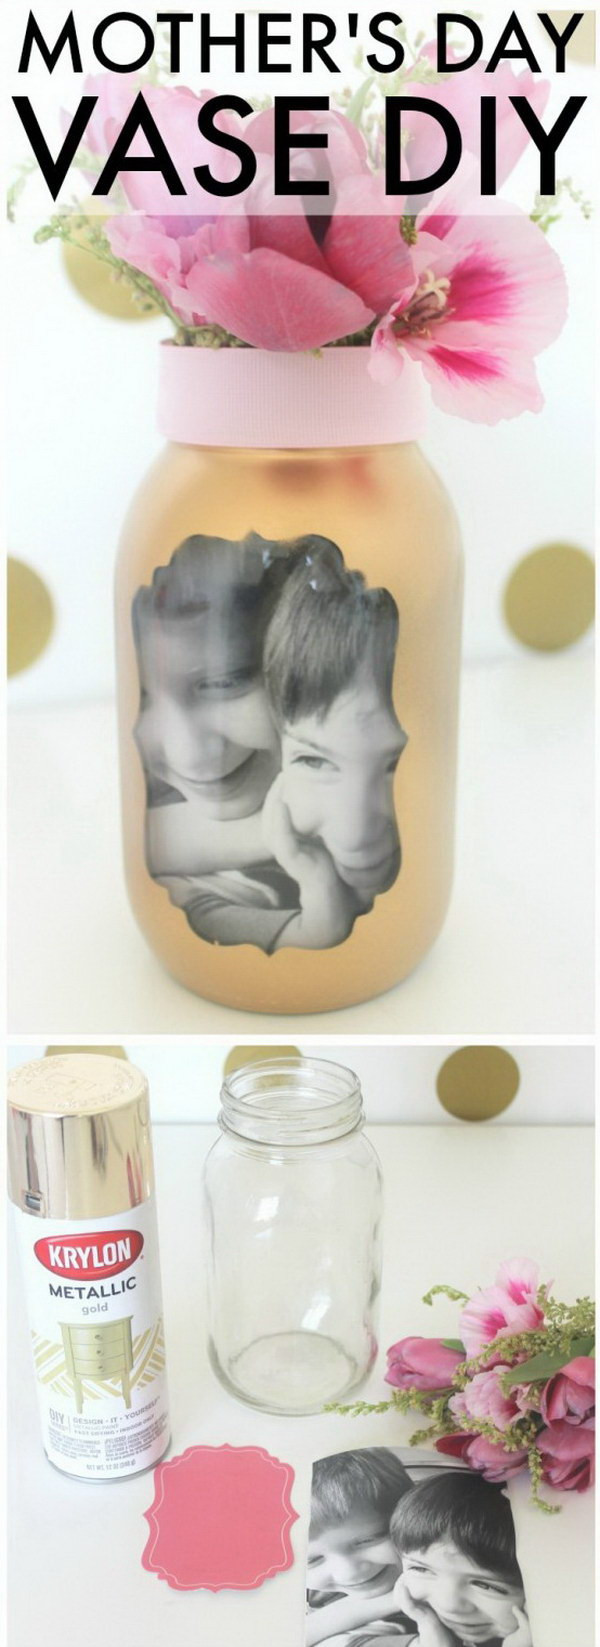 Easy Diy Mother's Day Gifts
 30 DIY Mother s Day Gifts with Lots of Tutorials